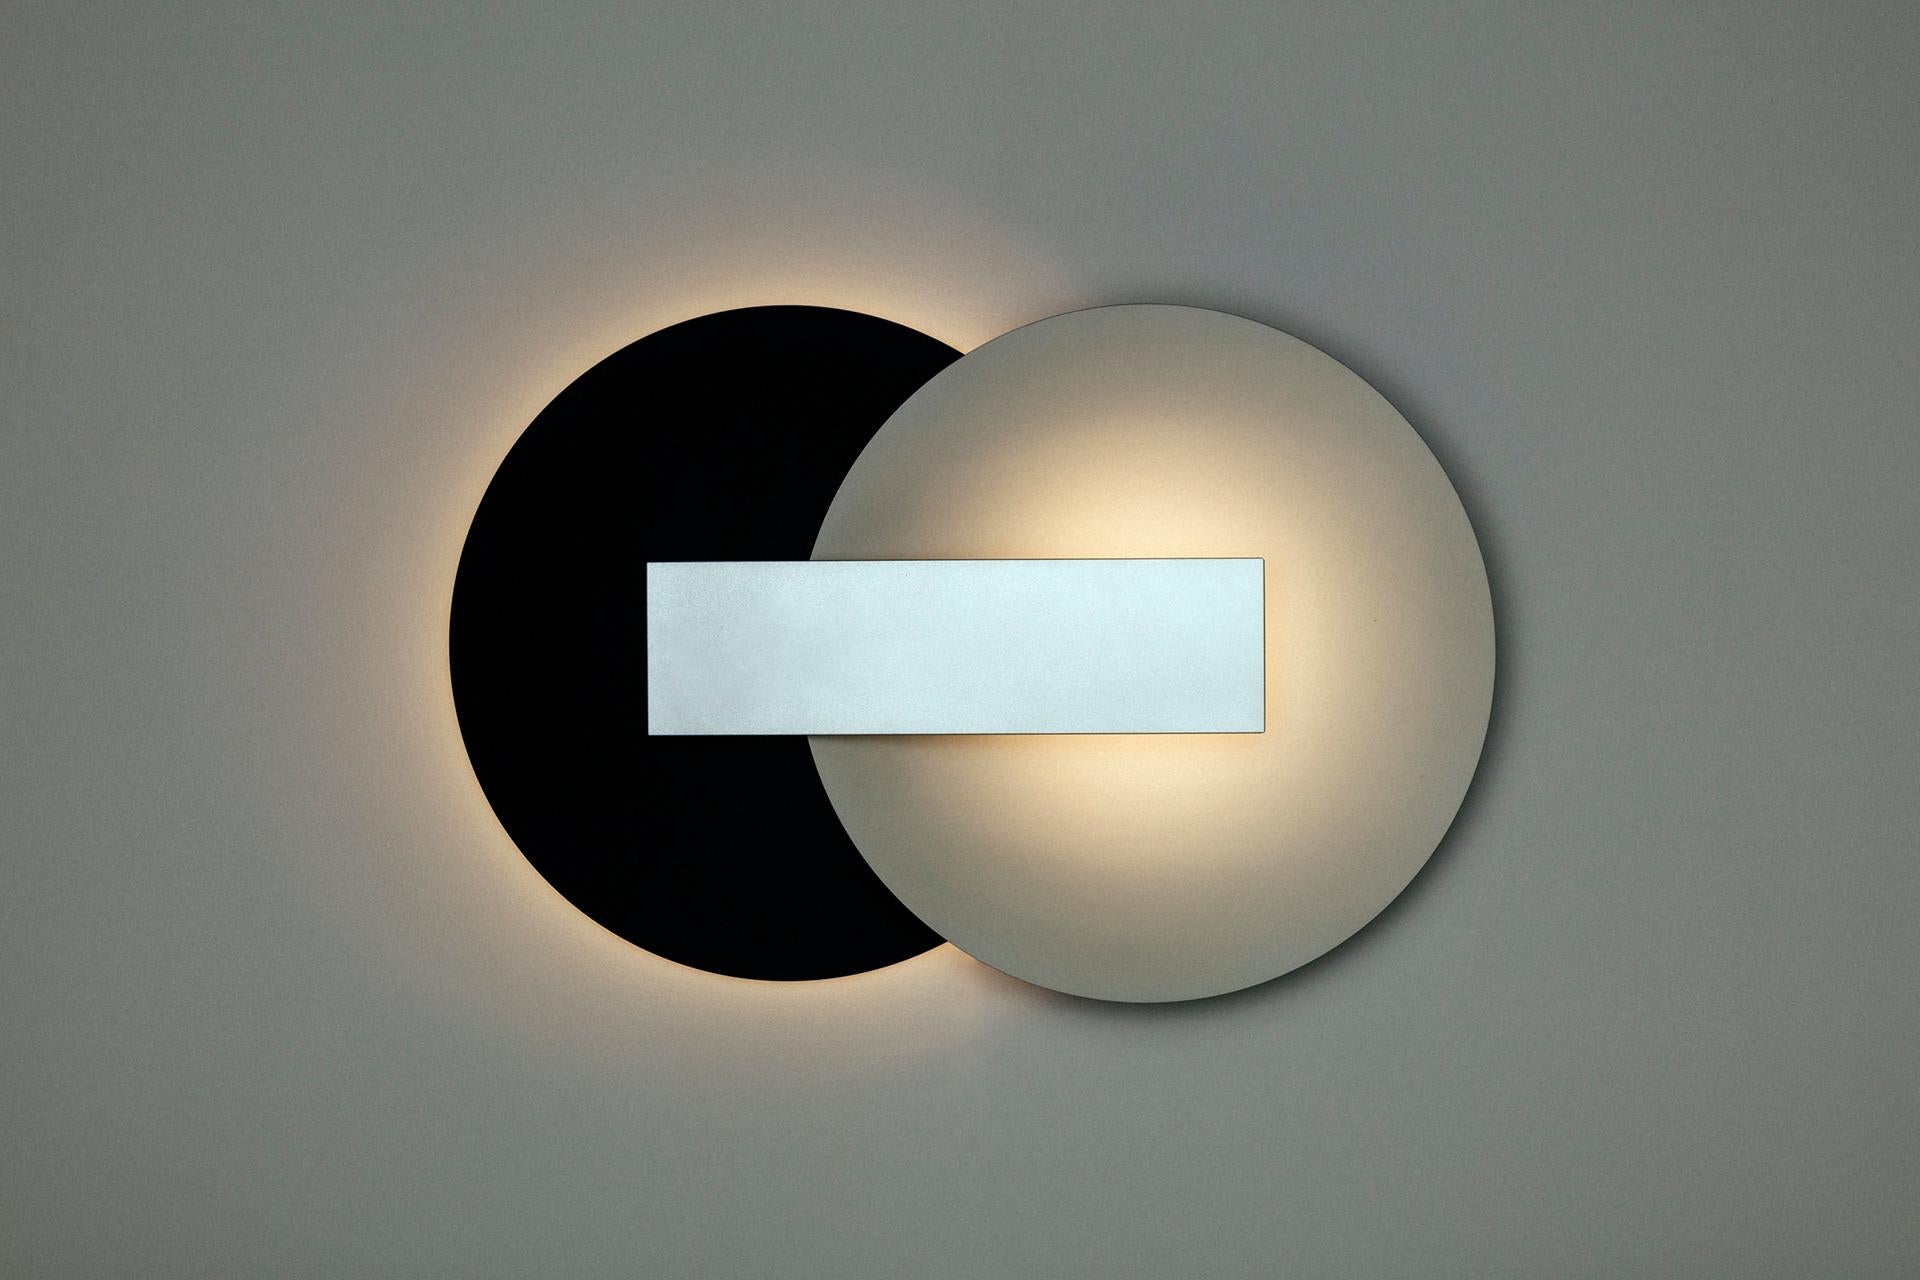 Orbe is a wall lamp with indirect light, designed to provide soft illumination to the environment.
?
The piece has a simple structure, composed by the minimum required for its functionality: the front box houses the light source and provides the